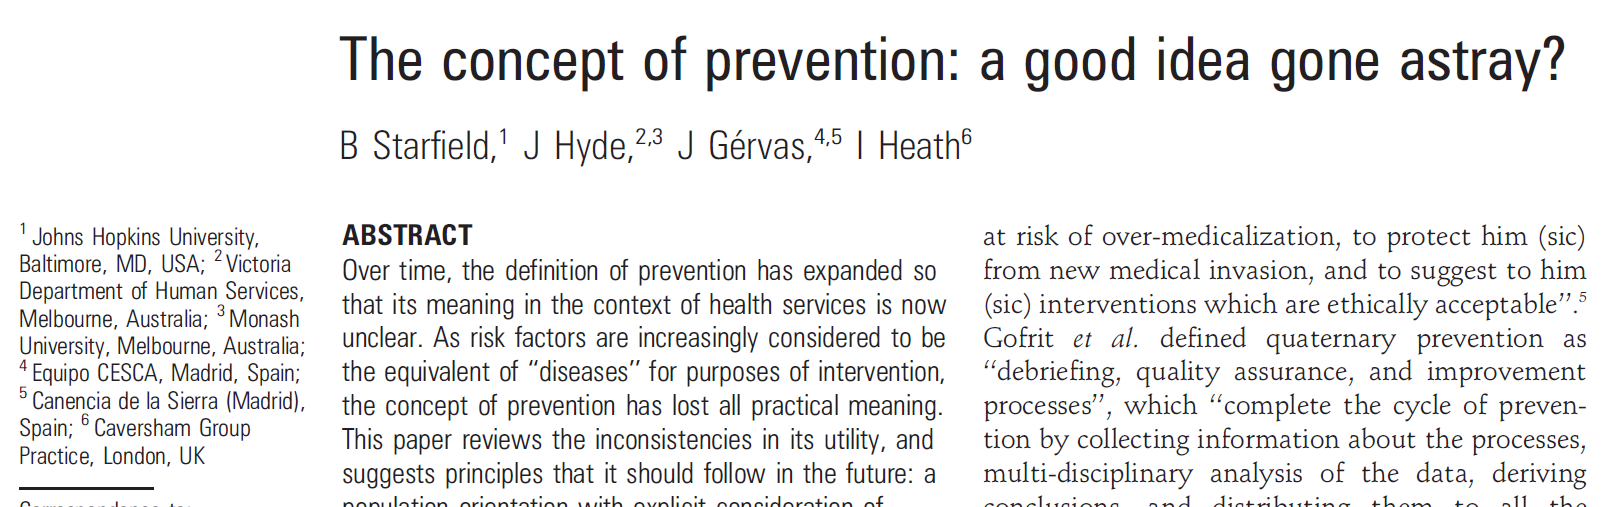 Bone density and osteoporosis Hypertension Conditions and risk factors GPs are recommended to screen violence? Abuse? for or discuss Early Physical Pre-hypertensive?